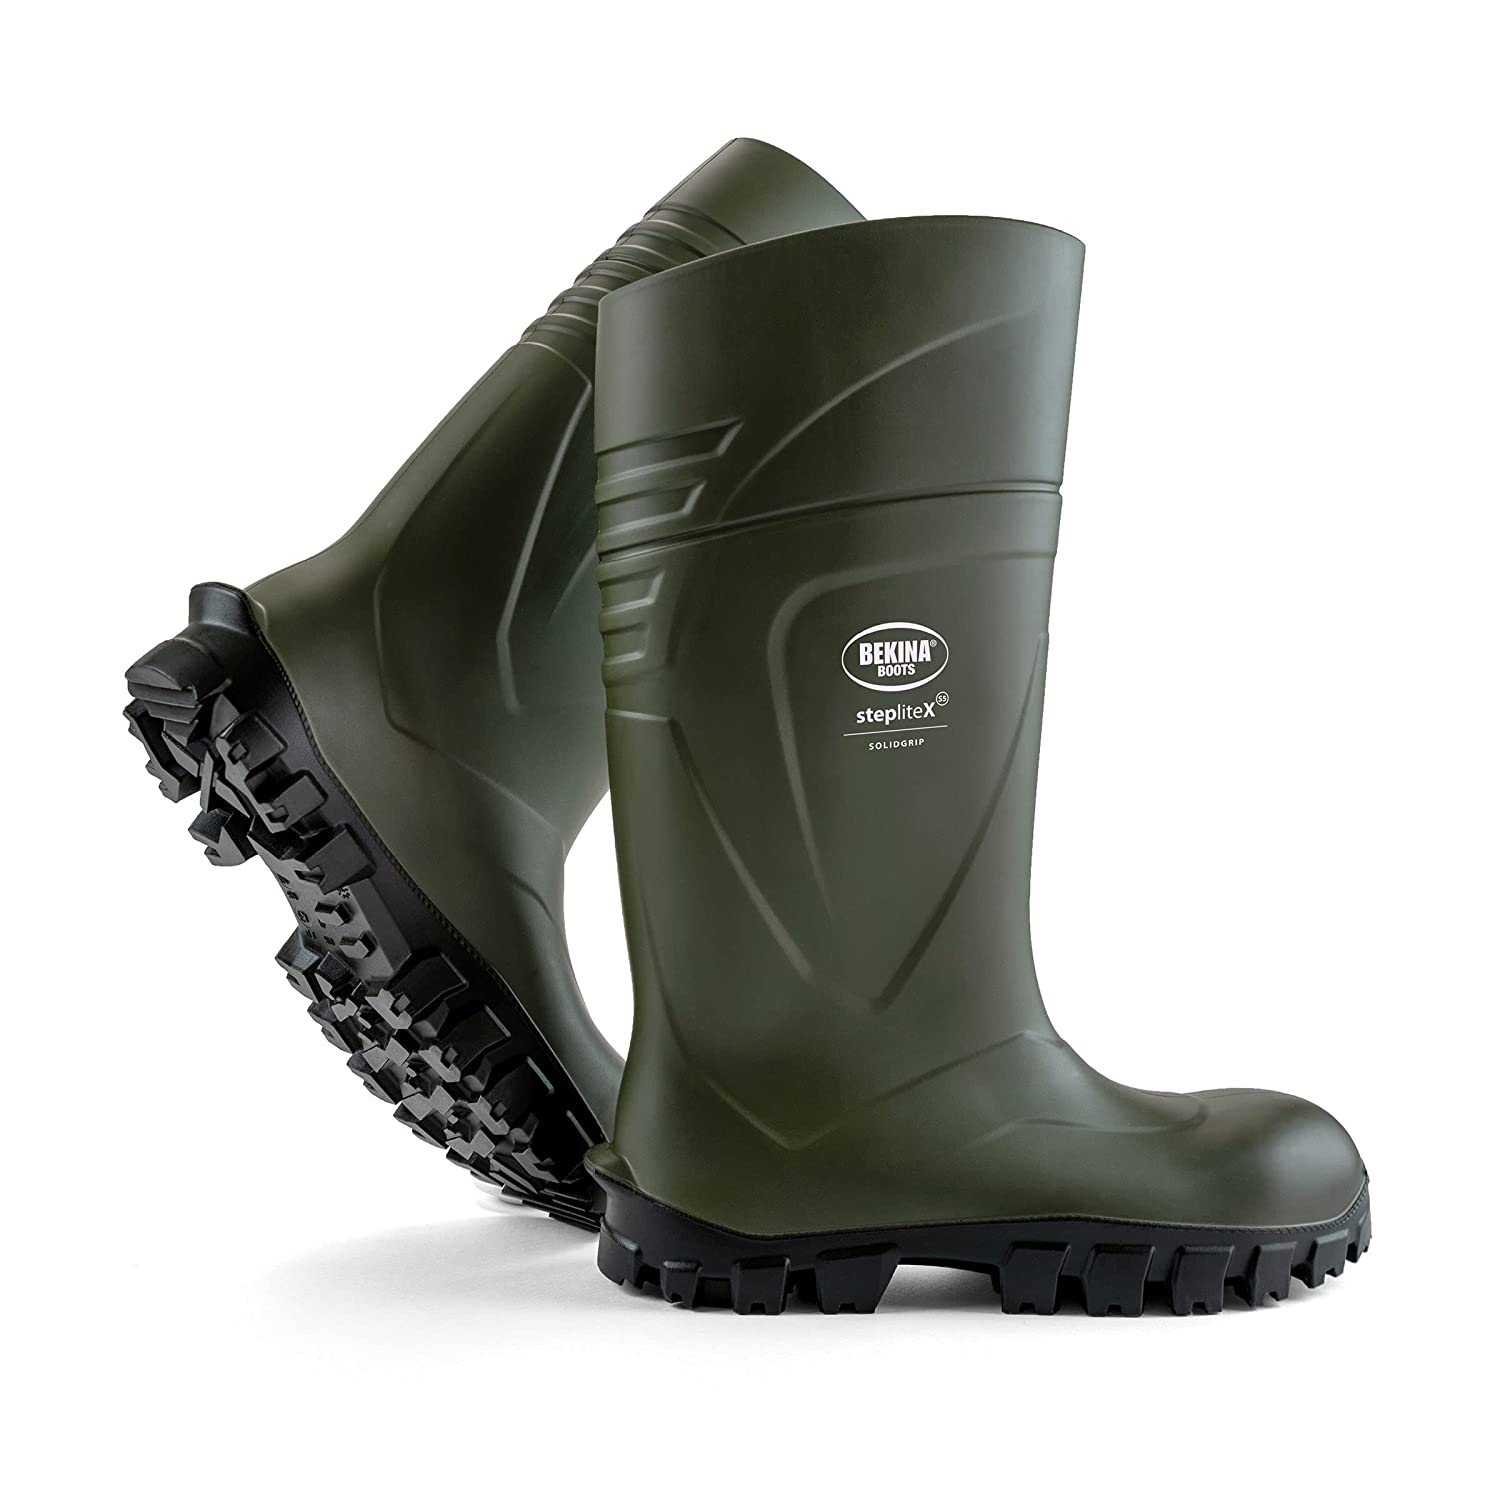 Bekina Solid Grip Green Size 13 Boots - NWT FM SOLUTIONS - YOUR CATERING WHOLESALER